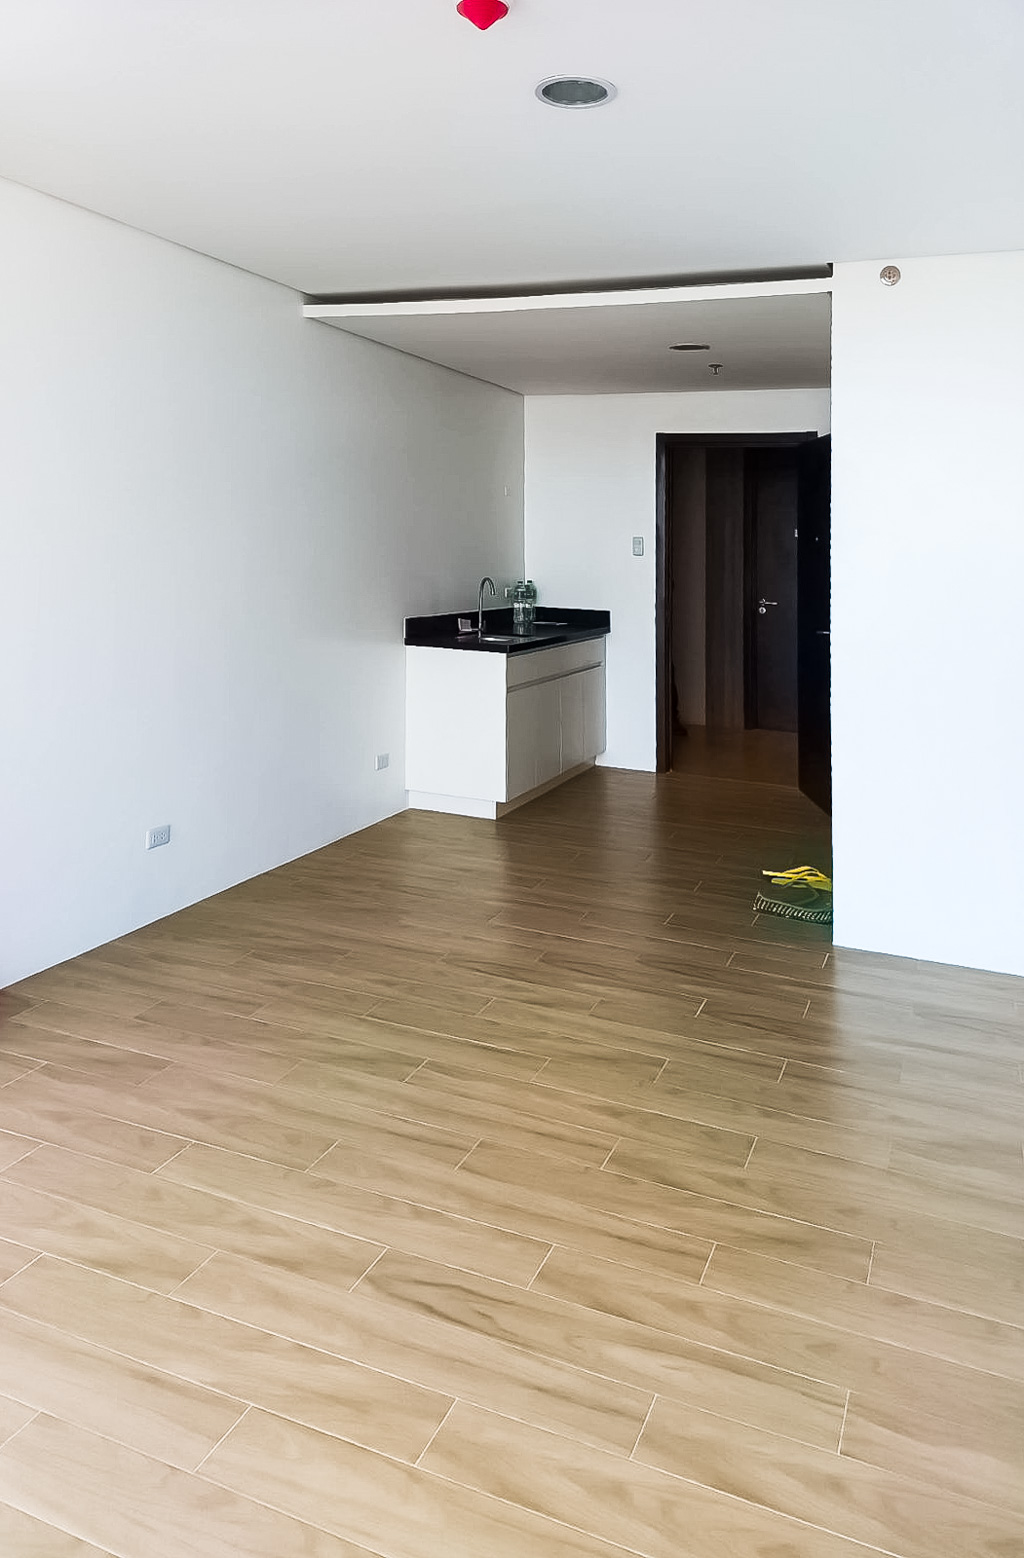 RCPMBA2 30 SqM Office Residential Space for Rent in Cebu - 3